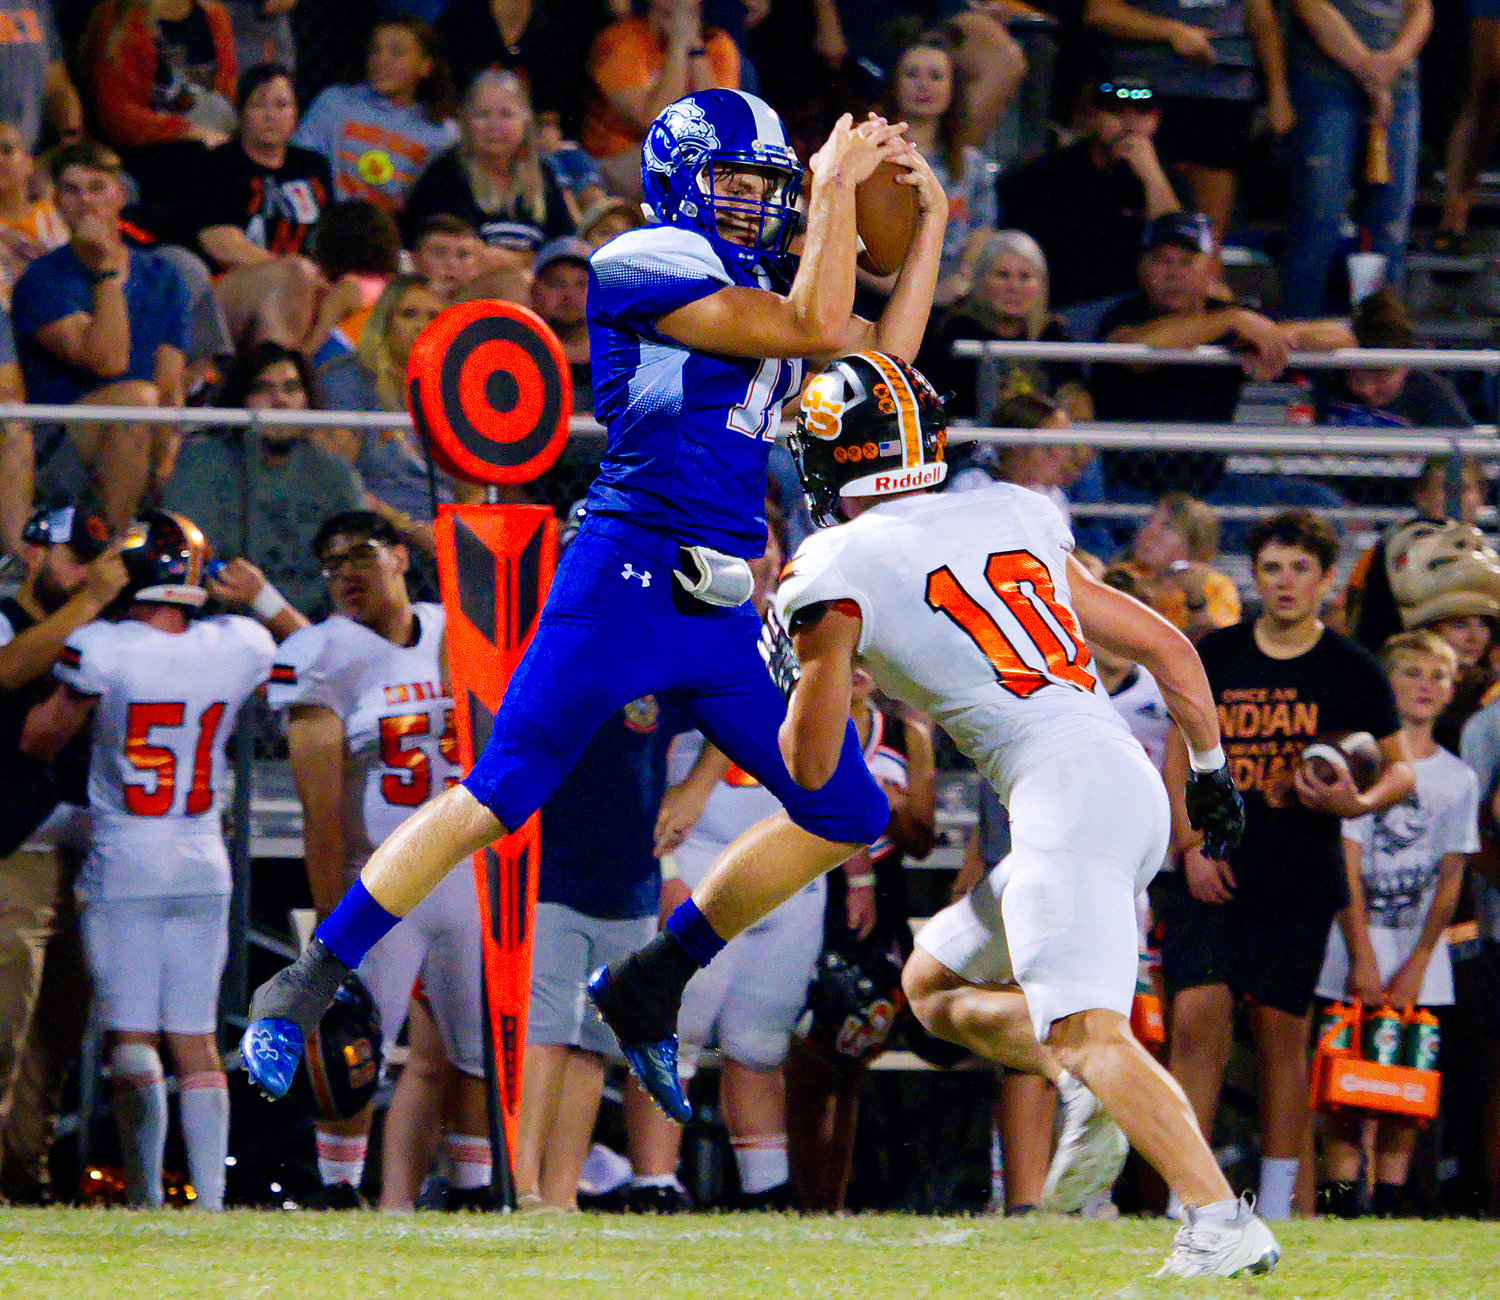 Klayton Meadows catches a streak pass to gain yardage for Quitman. [find more football photos]